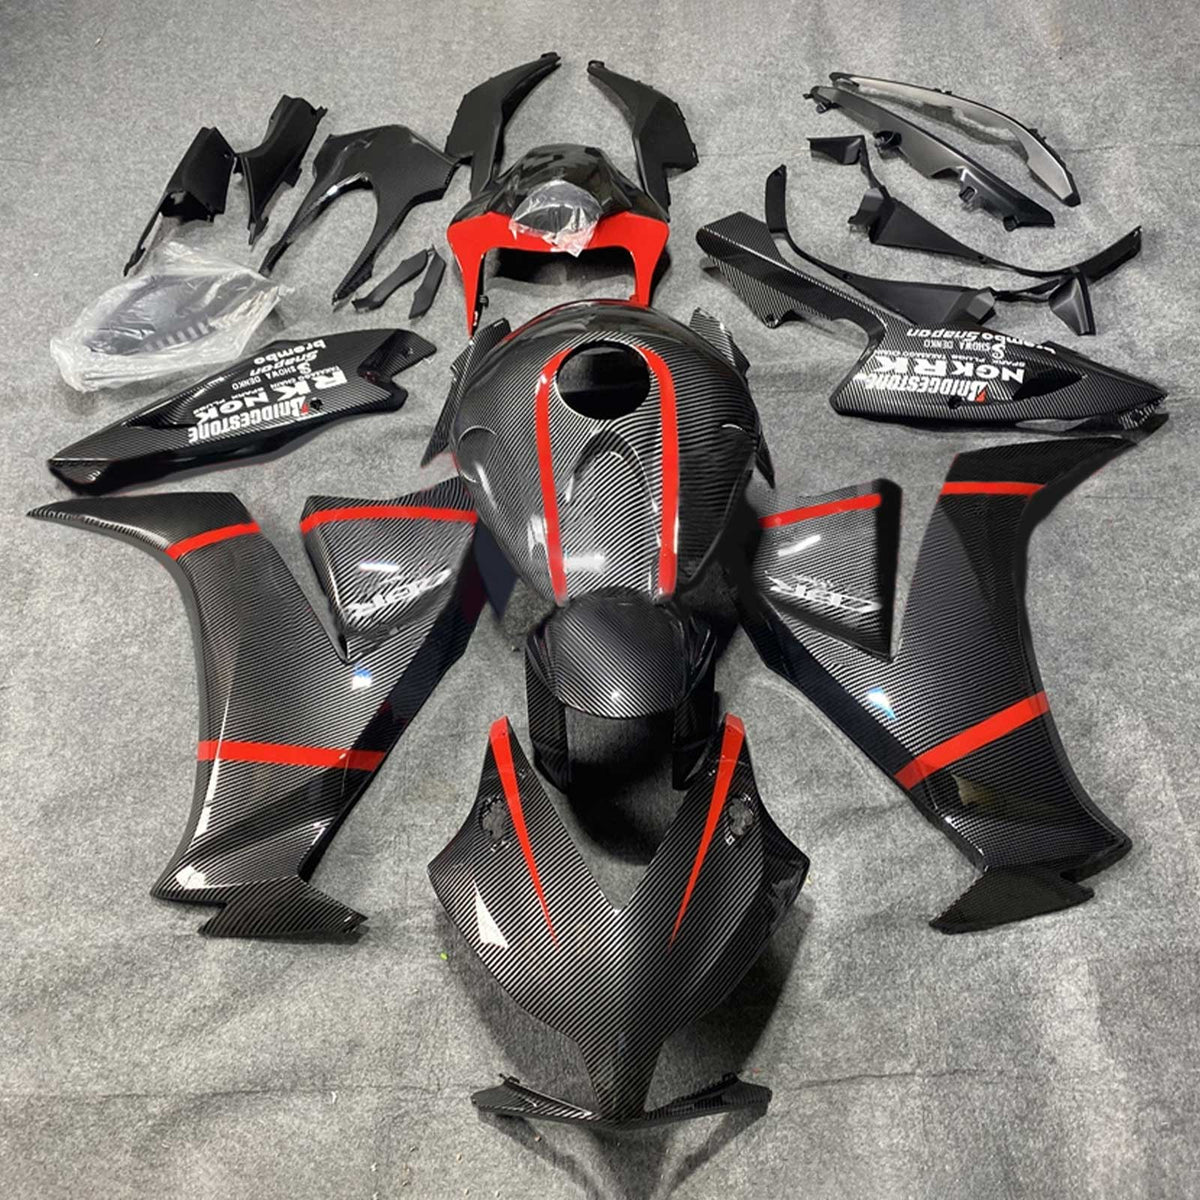 Amotopart 2012-2016 CBR1000RR Honda Carbon Fiber with Red Accent Fairing Kit